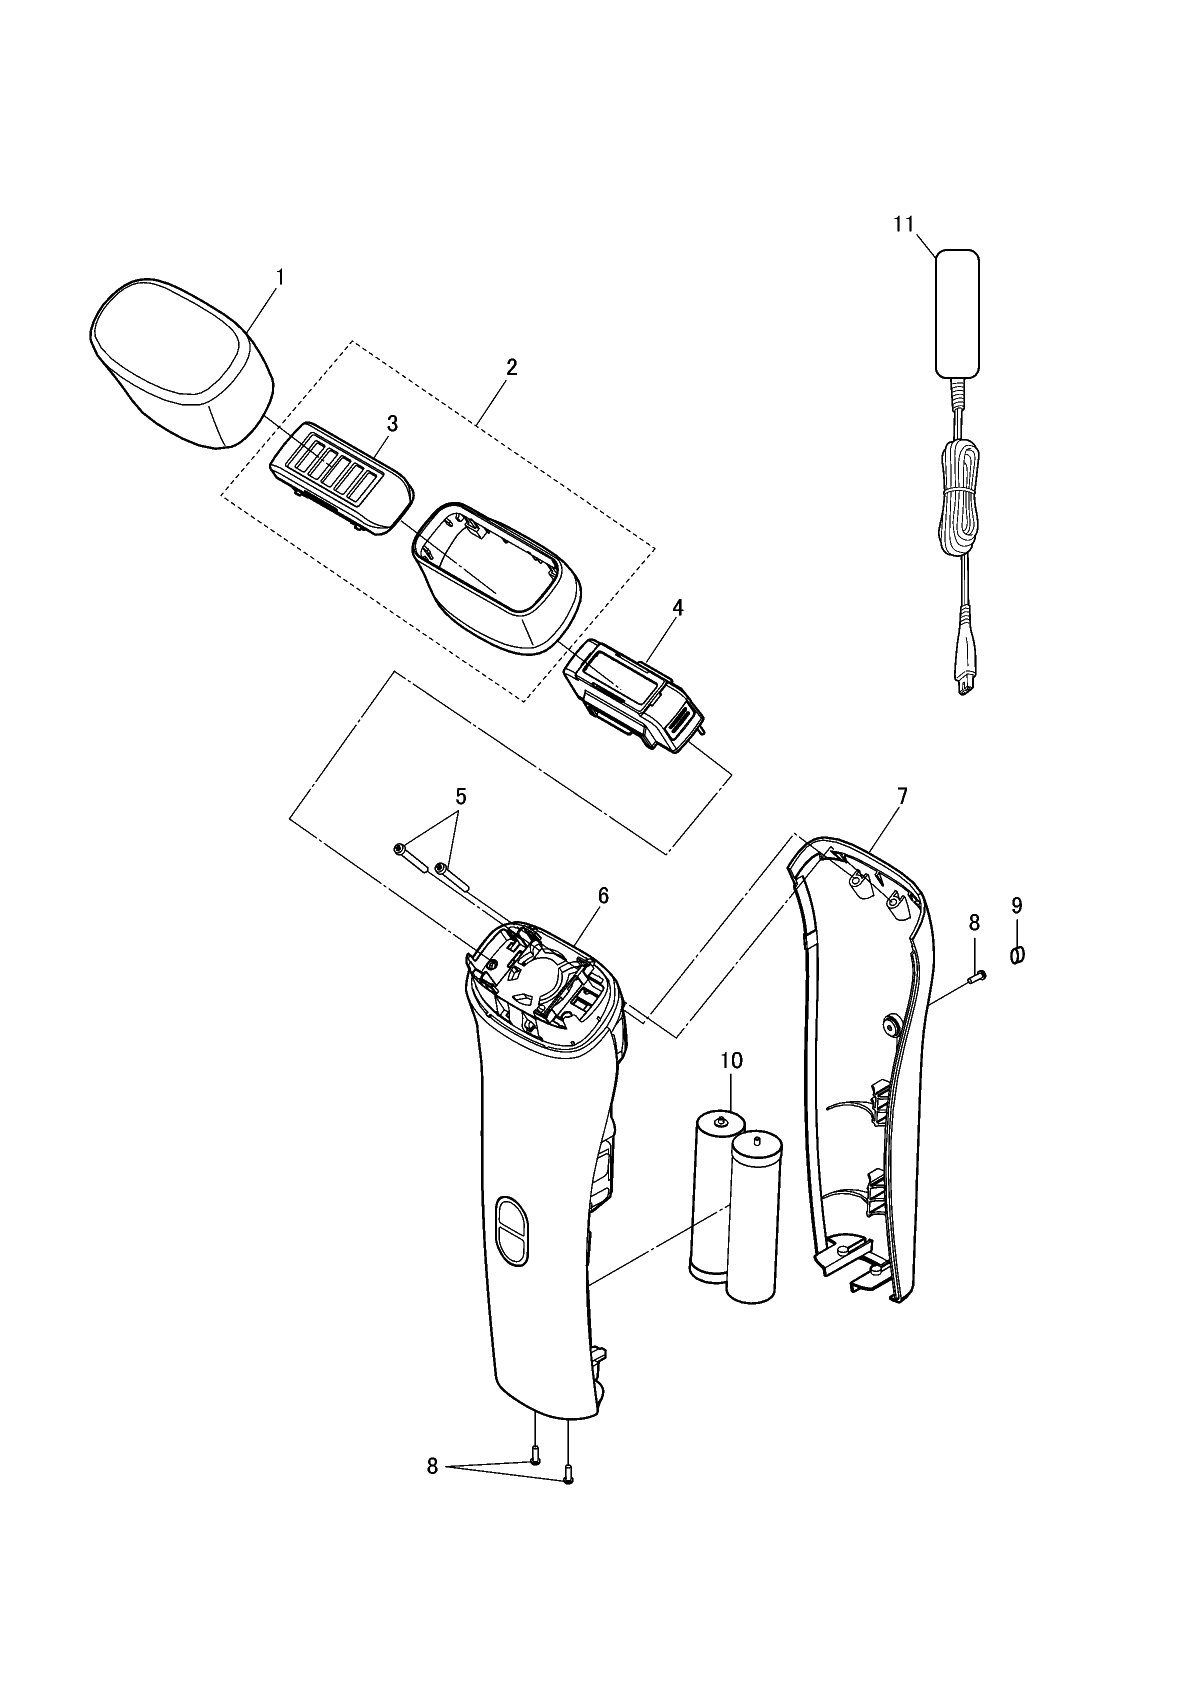 ES-WH80: Exploded View